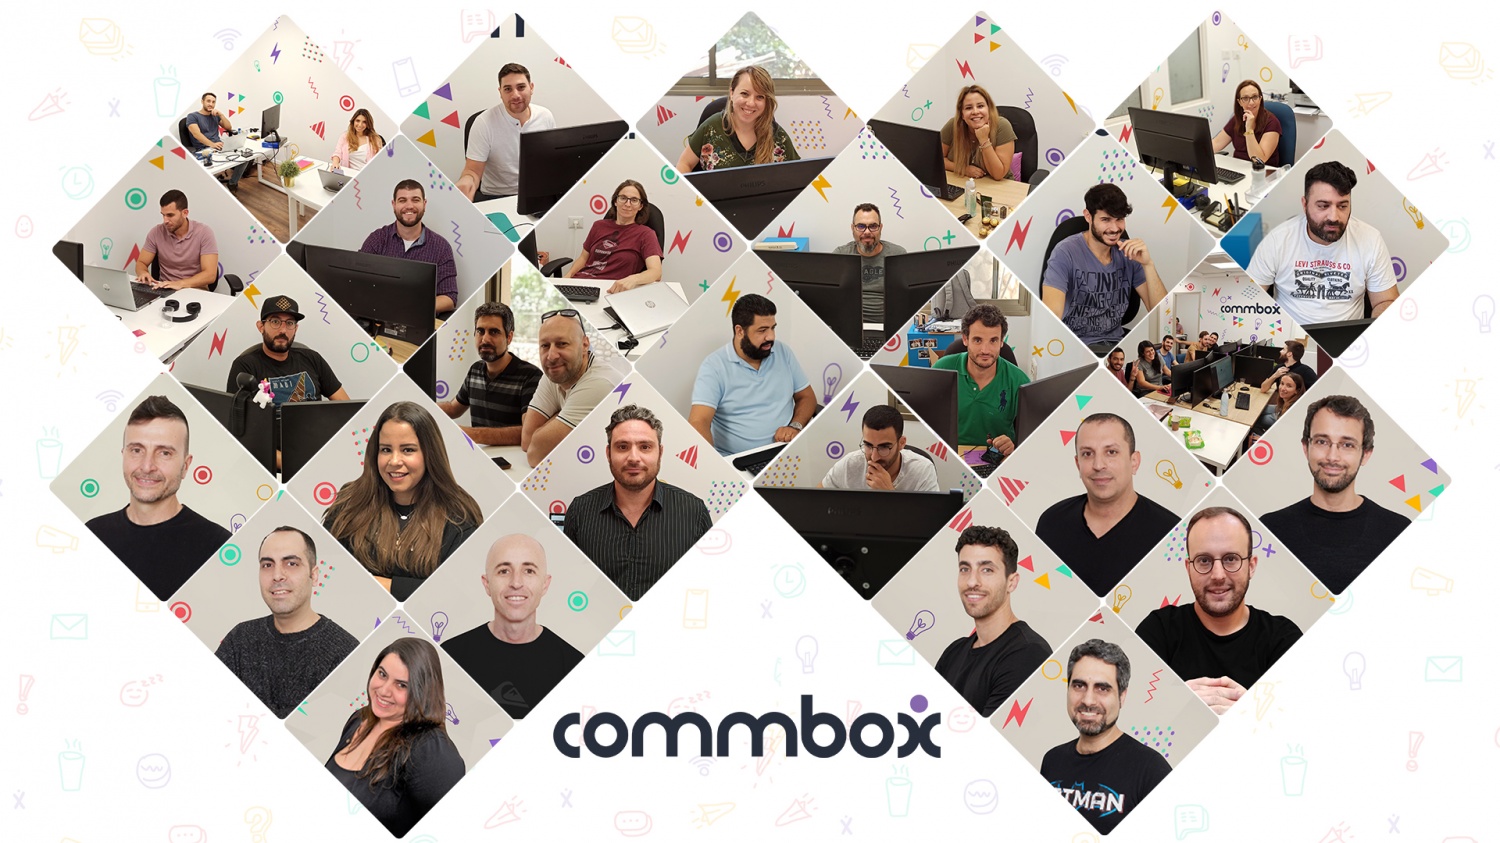 CommBox Bringing an Improved Concept to Support its Vision to Become the First Autonomous Communication Center